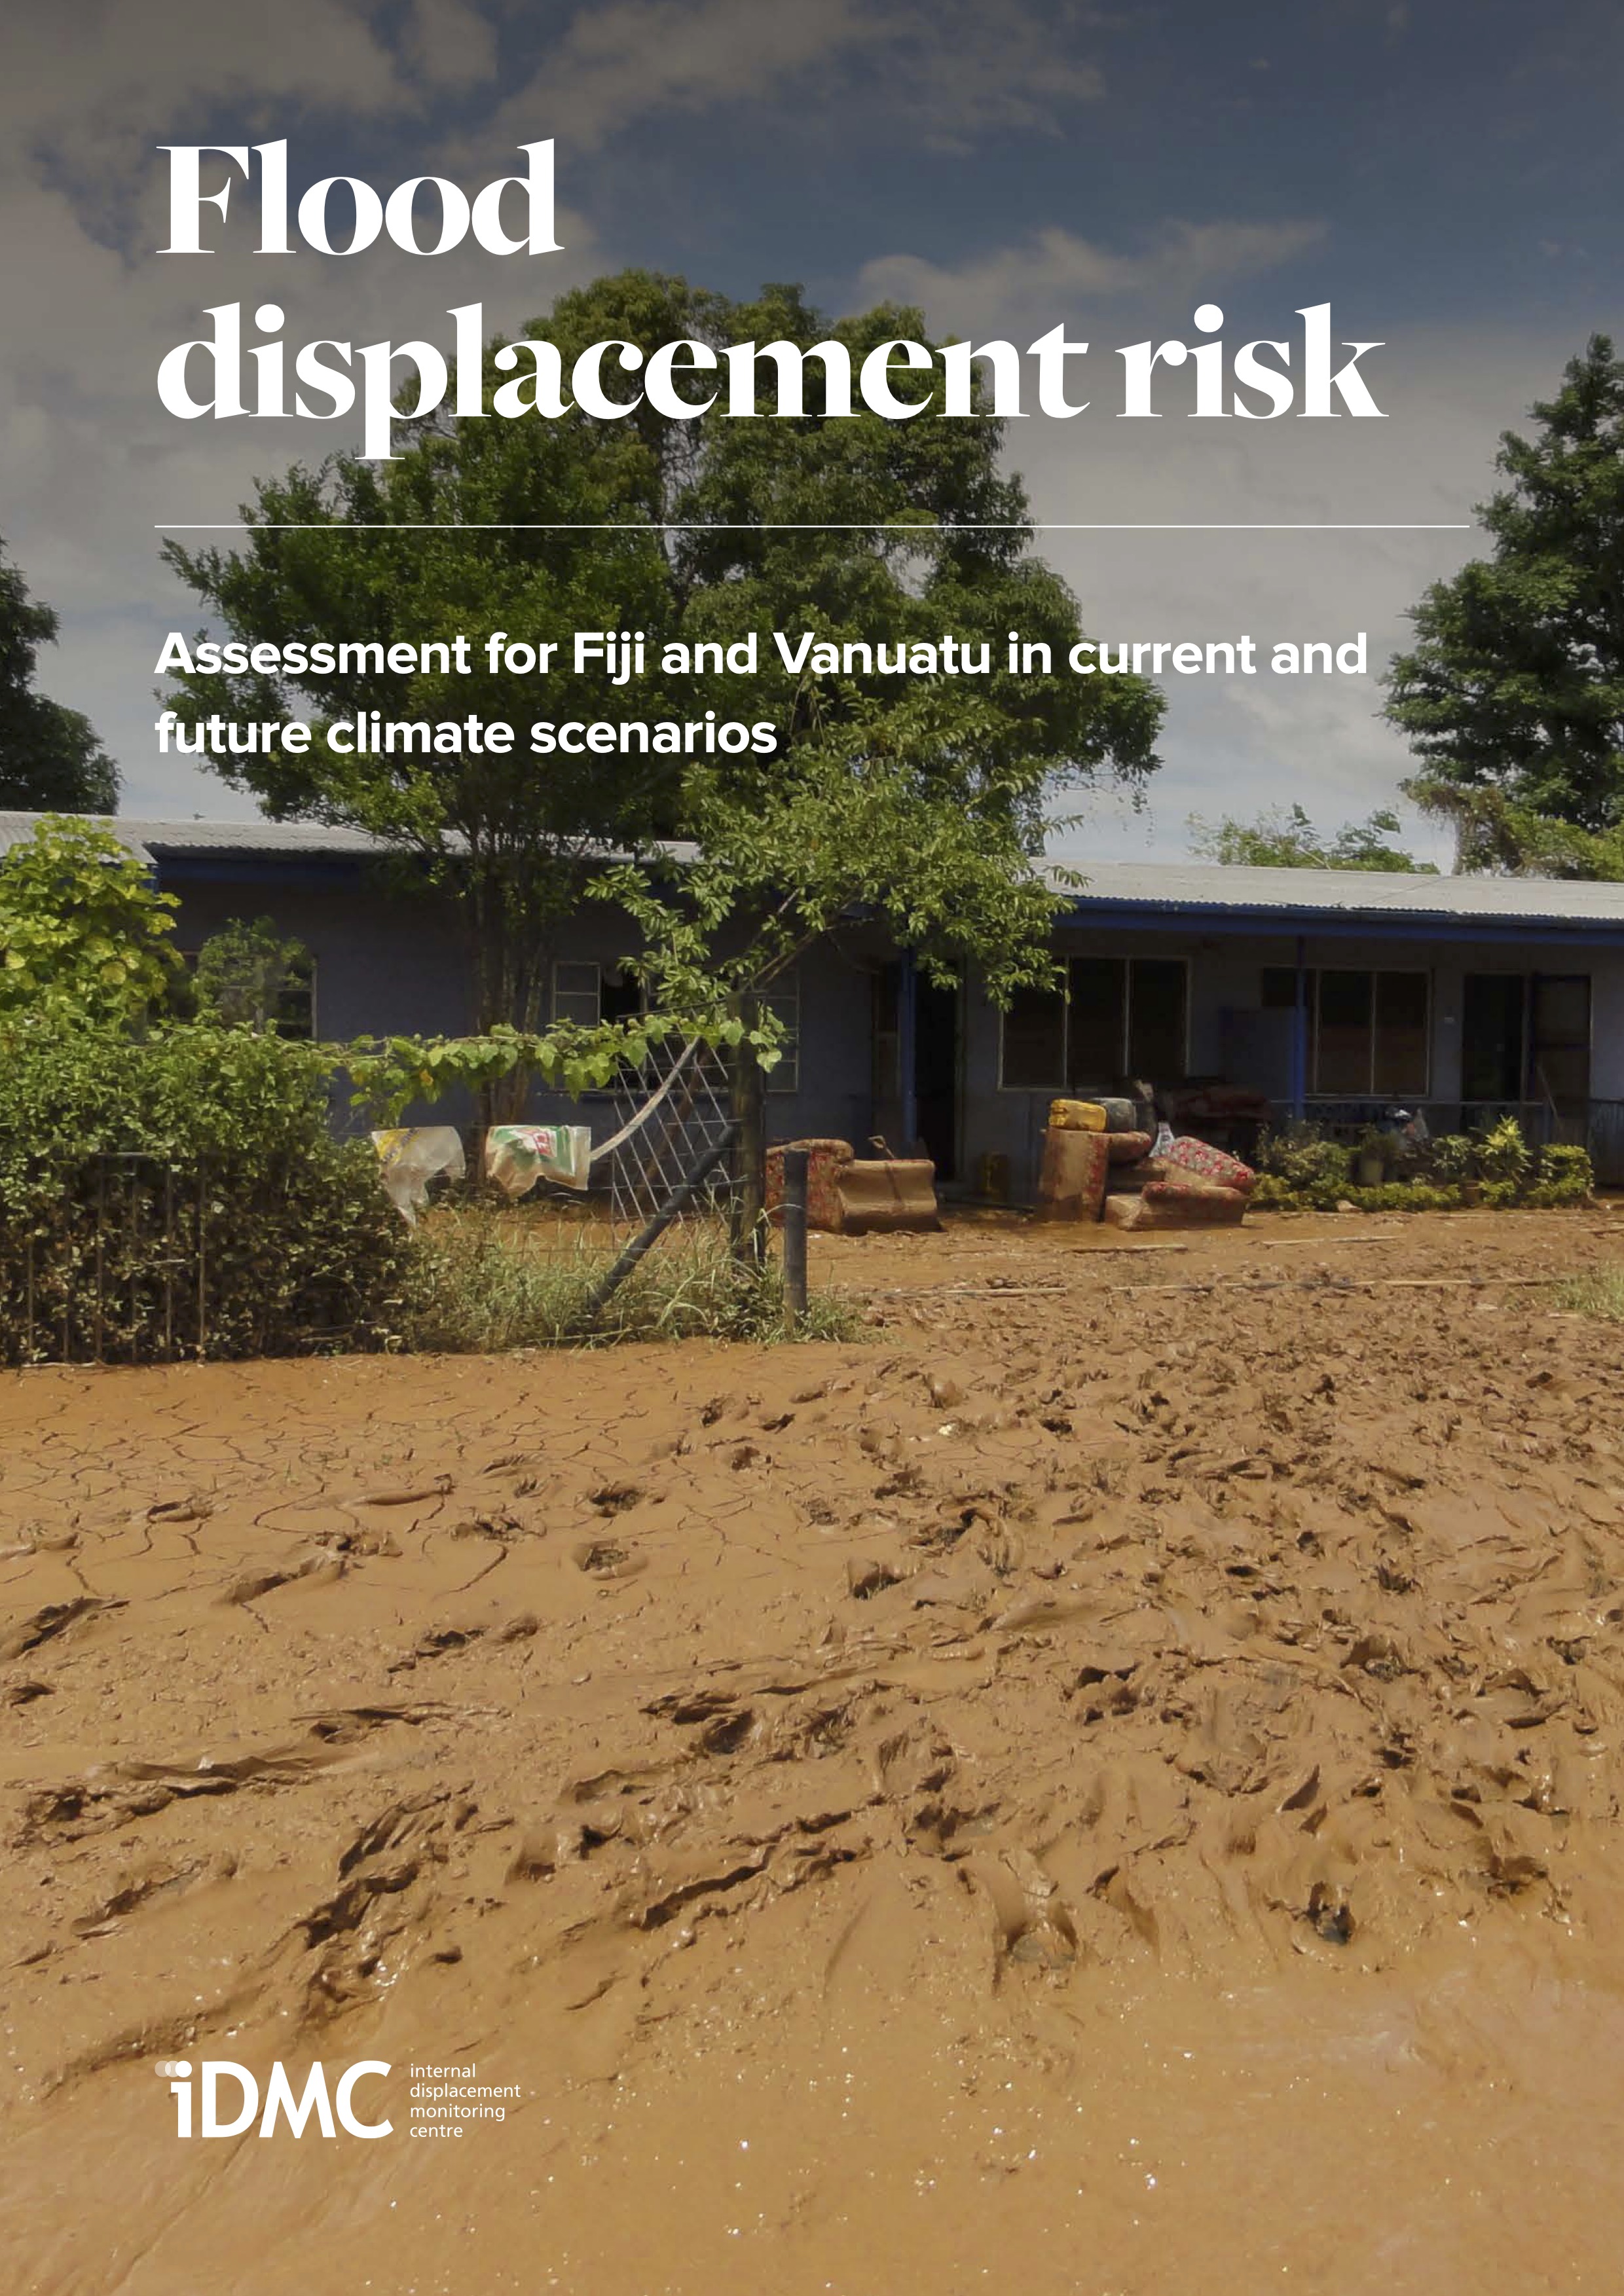 Flood displacement risk: Assessment for Fiji and Vanuatu in current and future climate scenarios